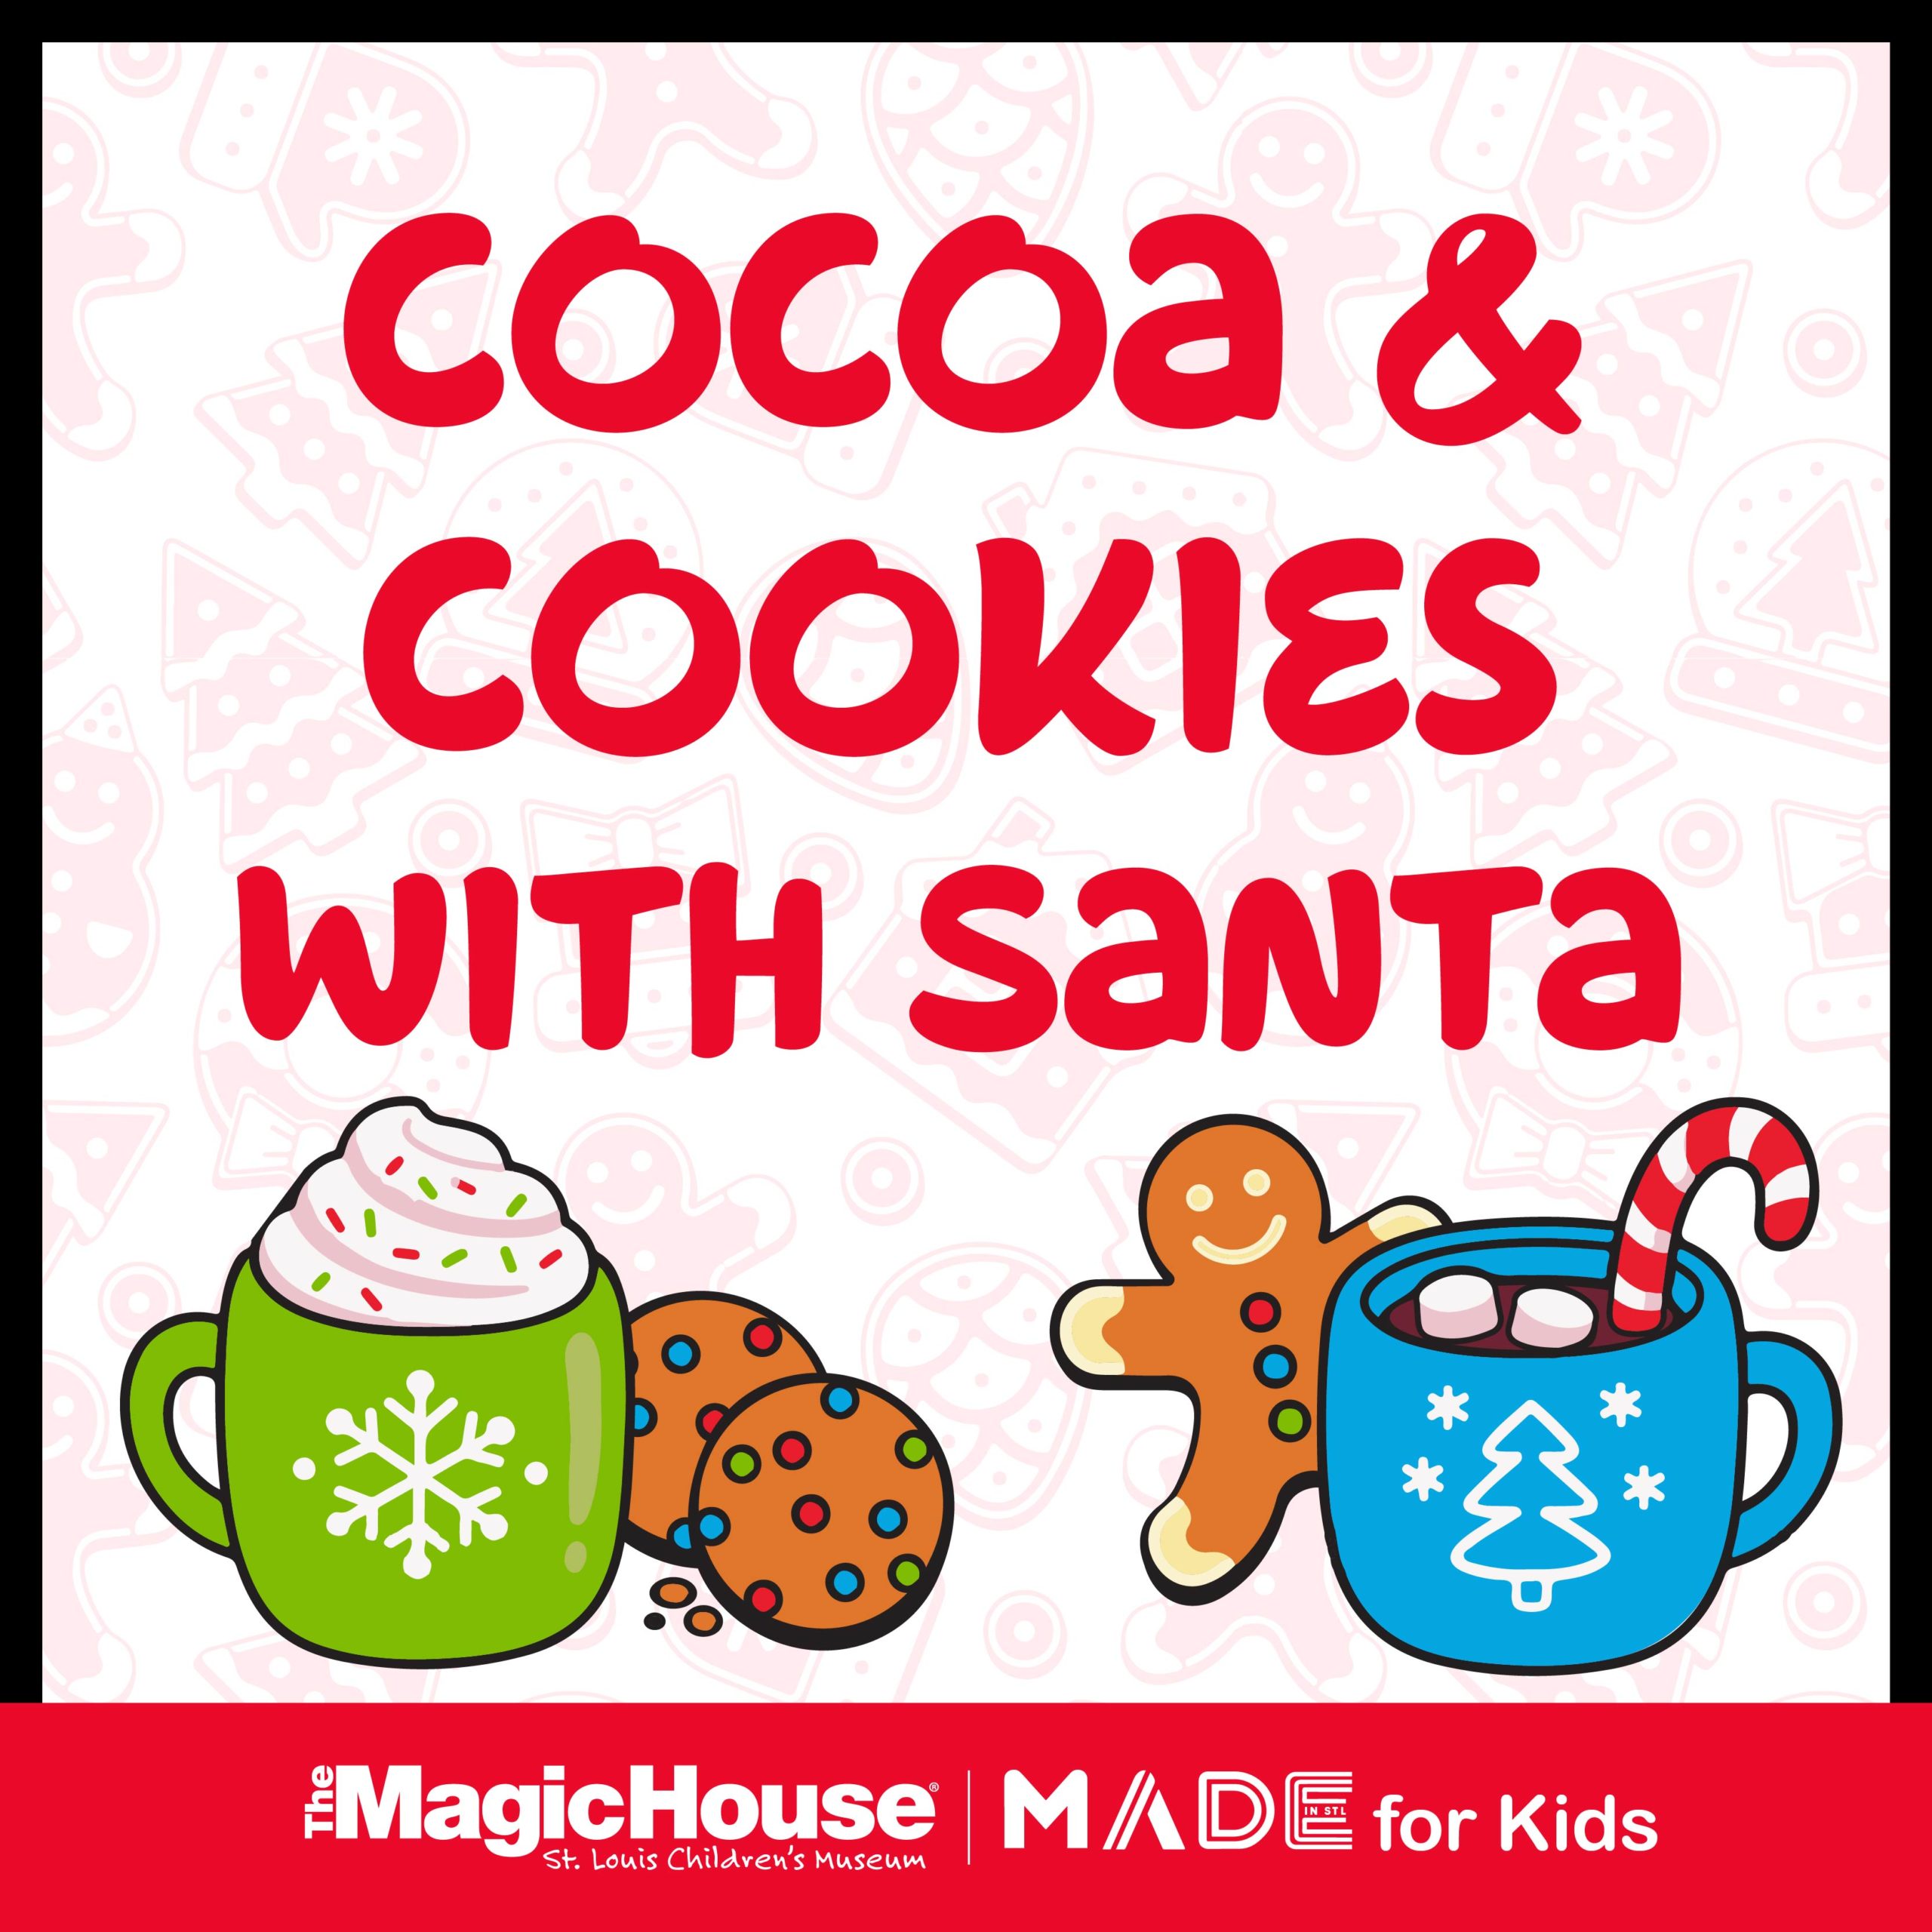 Cocoa & Cookies with Santa